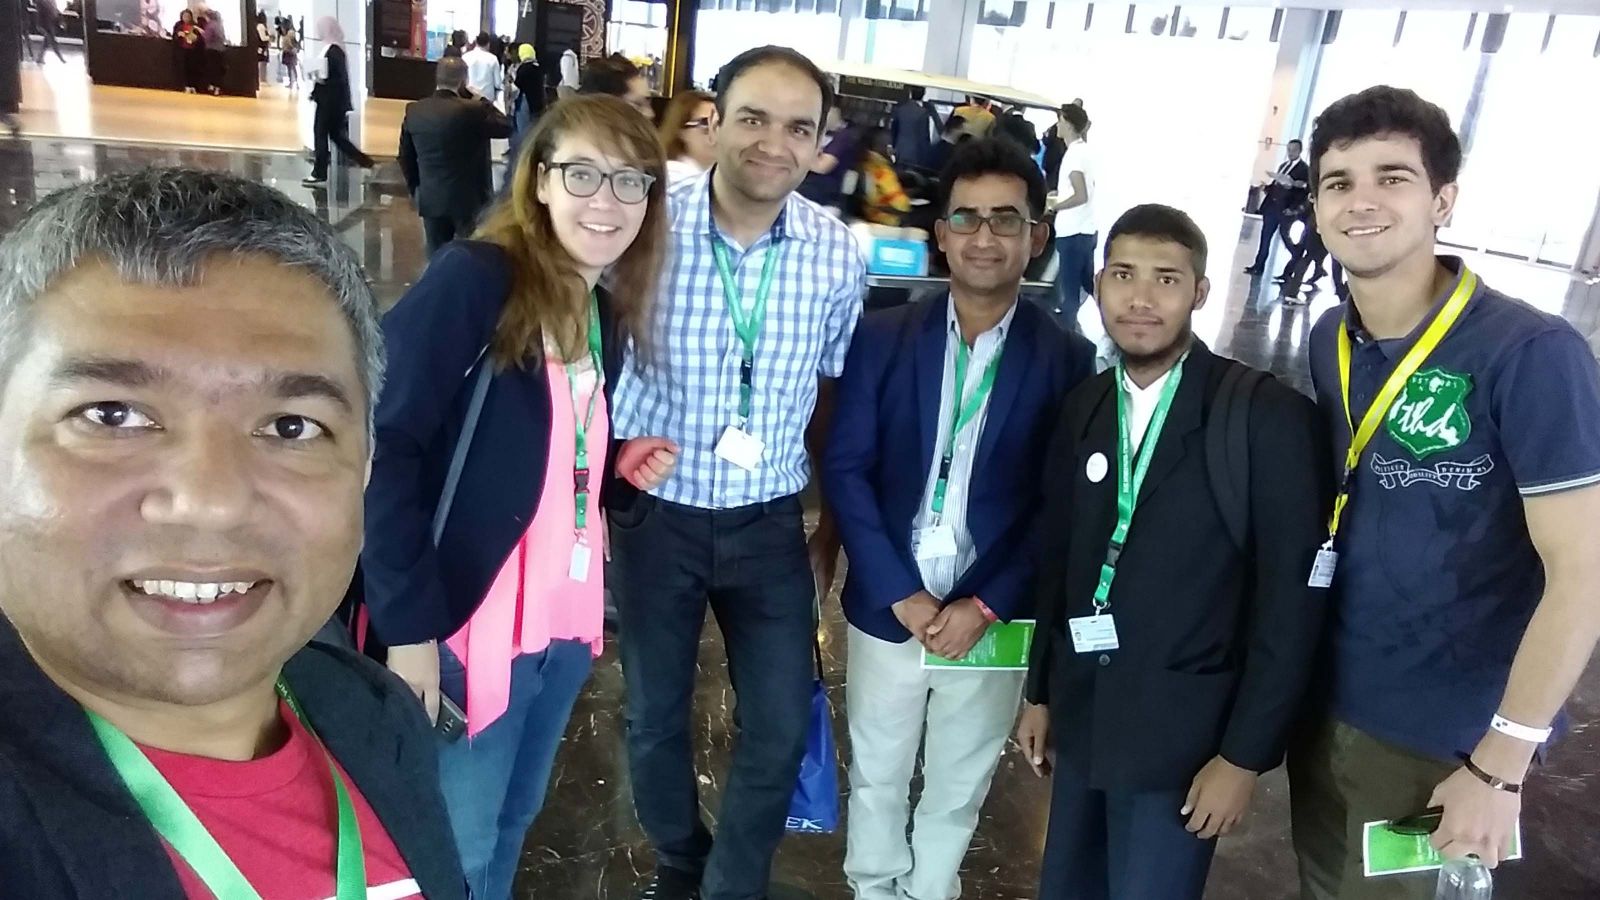 Dr Saud Khan with other delegates at the World Youth Forum, 2018 in Cairo, Egypt.